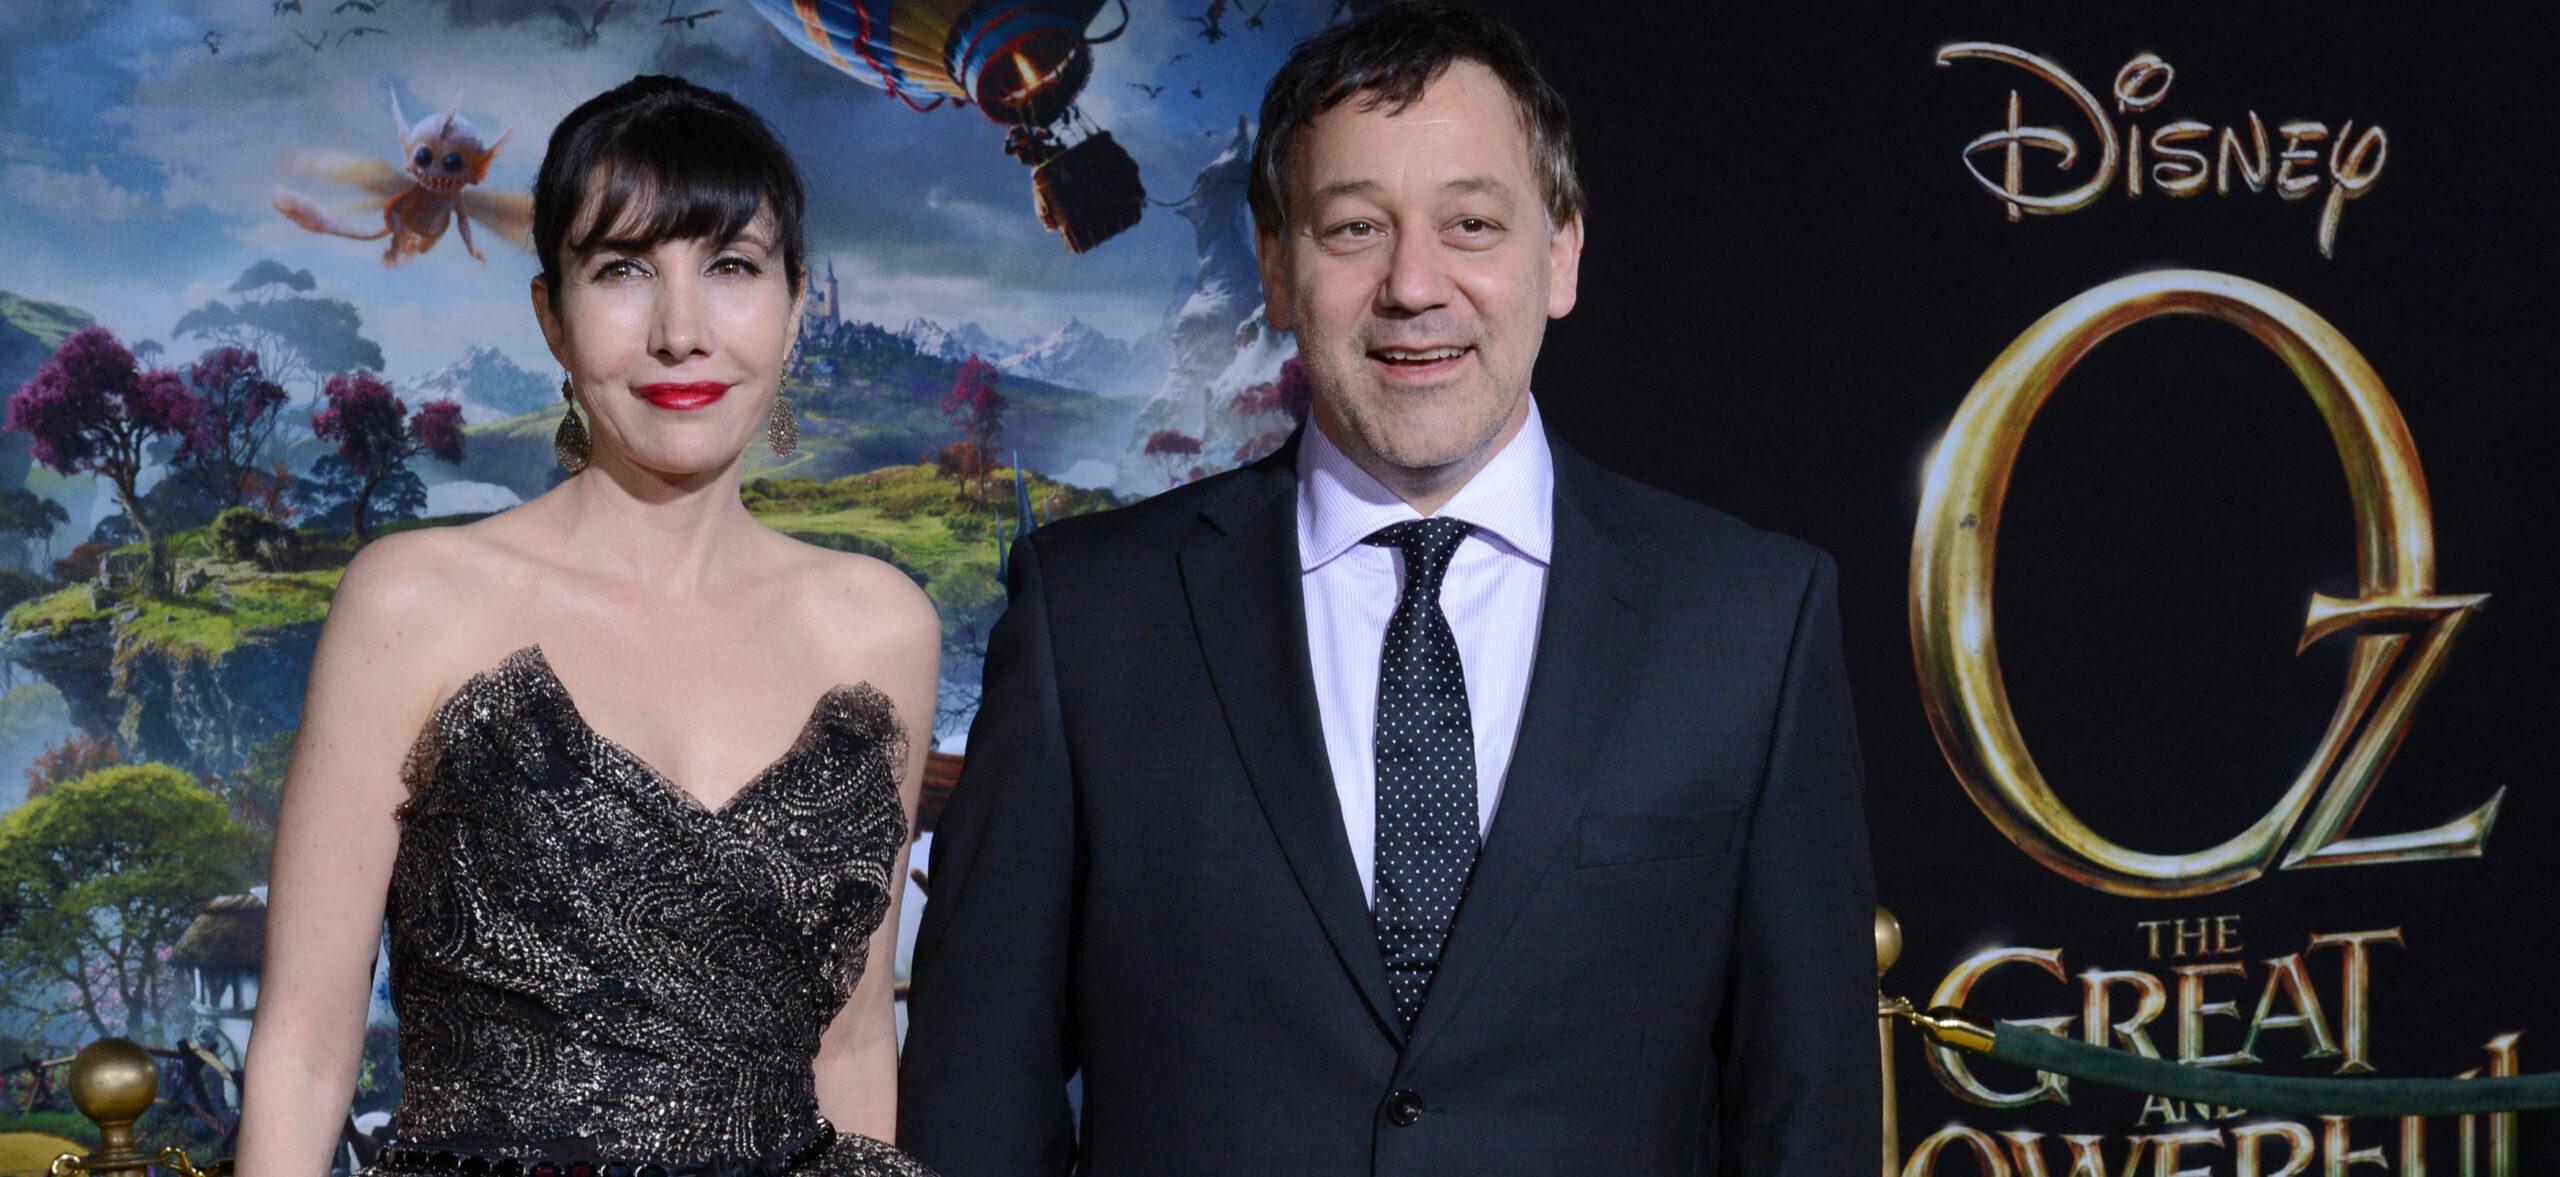 Director Sam Raimi’s Wife Files For Divorce After 30 Years, Demands Spousal Support